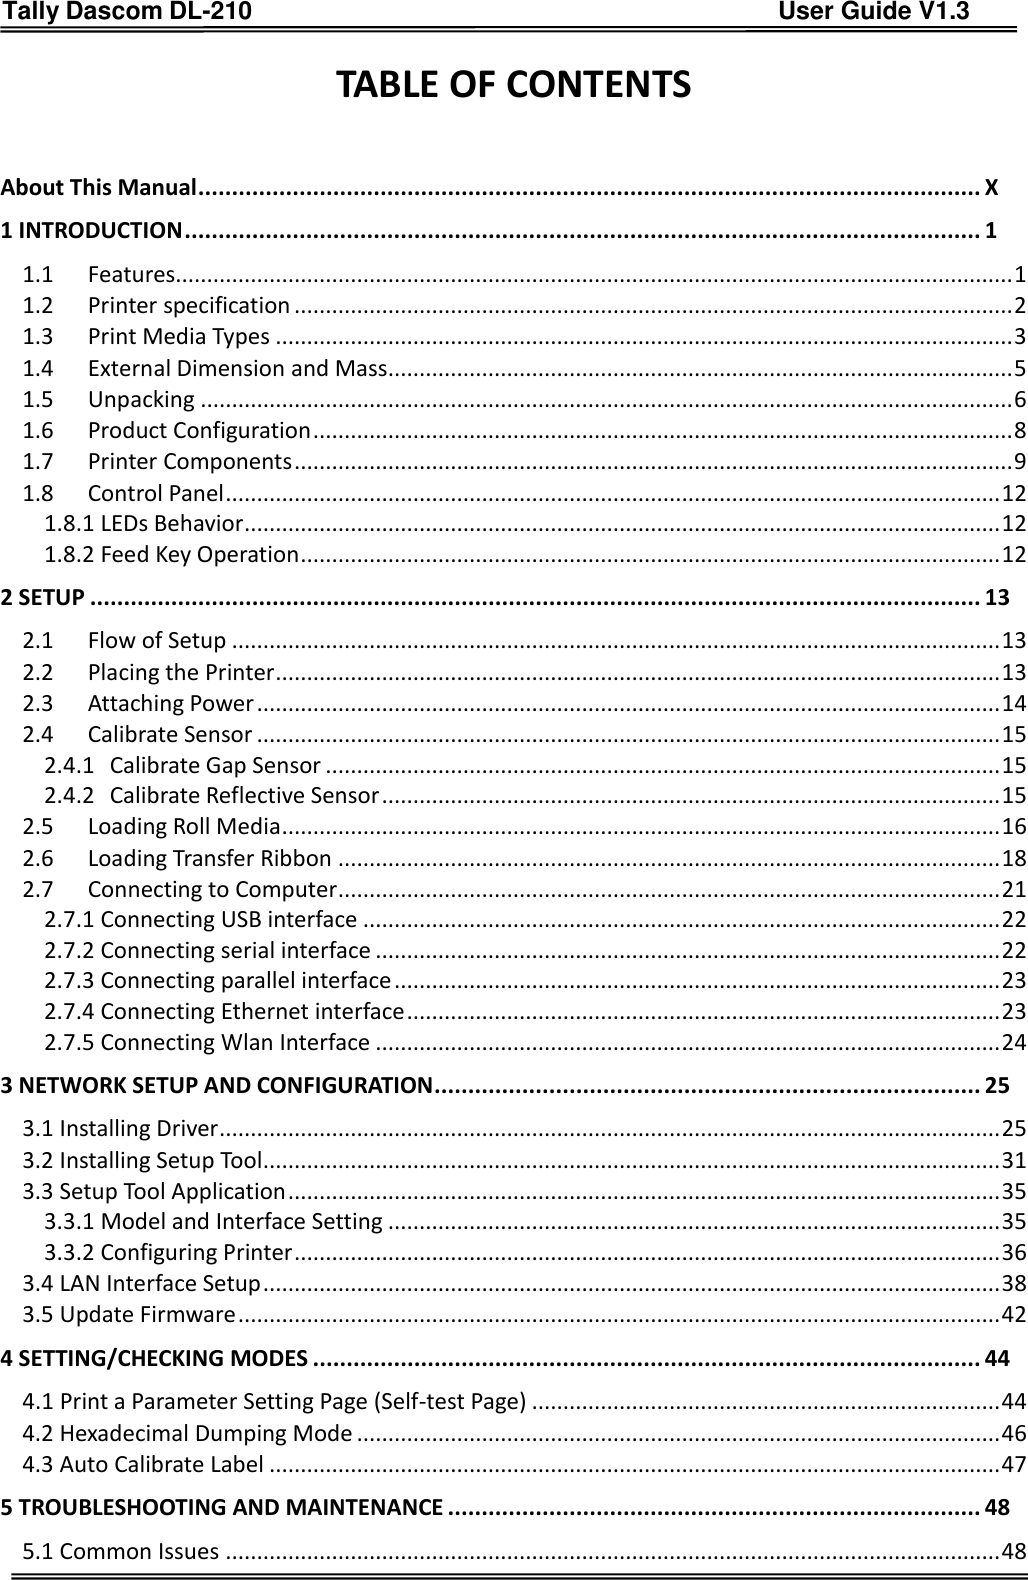 Tally Dascom DL-210                                          User Guide V1.3     TABLE OF CONTENTS  About This Manual .................................................................................................................... X 1 INTRODUCTION ...................................................................................................................... 1 1.1 Features...................................................................................................................................... 1 1.2 Printer specification ................................................................................................................... 2 1.3 Print Media Types ...................................................................................................................... 3 1.4 External Dimension and Mass.................................................................................................... 5 1.5 Unpacking .................................................................................................................................. 6 1.6 Product Configuration ................................................................................................................ 8 1.7 Printer Components ................................................................................................................... 9 1.8 Control Panel ............................................................................................................................ 12 1.8.1 LEDs Behavior ......................................................................................................................... 12 1.8.2 Feed Key Operation ................................................................................................................ 12 2 SETUP .................................................................................................................................... 13 2.1 Flow of Setup ........................................................................................................................... 13 2.2 Placing the Printer .................................................................................................................... 13 2.3 Attaching Power ....................................................................................................................... 14 2.4 Calibrate Sensor ....................................................................................................................... 15 2.4.1 Calibrate Gap Sensor ............................................................................................................ 15 2.4.2 Calibrate Reflective Sensor ................................................................................................... 15 2.5 Loading Roll Media ................................................................................................................... 16 2.6 Loading Transfer Ribbon .......................................................................................................... 18 2.7 Connecting to Computer .......................................................................................................... 21 2.7.1 Connecting USB interface ...................................................................................................... 22 2.7.2 Connecting serial interface .................................................................................................... 22 2.7.3 Connecting parallel interface ................................................................................................. 23 2.7.4 Connecting Ethernet interface ............................................................................................... 23 2.7.5 Connecting Wlan Interface .................................................................................................... 24 3 NETWORK SETUP AND CONFIGURATION ................................................................................. 25 3.1 Installing Driver ............................................................................................................................. 25 3.2 Installing Setup Tool ...................................................................................................................... 31 3.3 Setup Tool Application .................................................................................................................. 35 3.3.1 Model and Interface Setting .................................................................................................. 35 3.3.2 Configuring Printer ................................................................................................................. 36 3.4 LAN Interface Setup ...................................................................................................................... 38 3.5 Update Firmware .......................................................................................................................... 42 4 SETTING/CHECKING MODES ................................................................................................... 44 4.1 Print a Parameter Setting Page (Self-test Page) ........................................................................... 44 4.2 Hexadecimal Dumping Mode ....................................................................................................... 46 4.3 Auto Calibrate Label ..................................................................................................................... 47 5 TROUBLESHOOTING AND MAINTENANCE ............................................................................... 48 5.1 Common Issues ............................................................................................................................ 48 